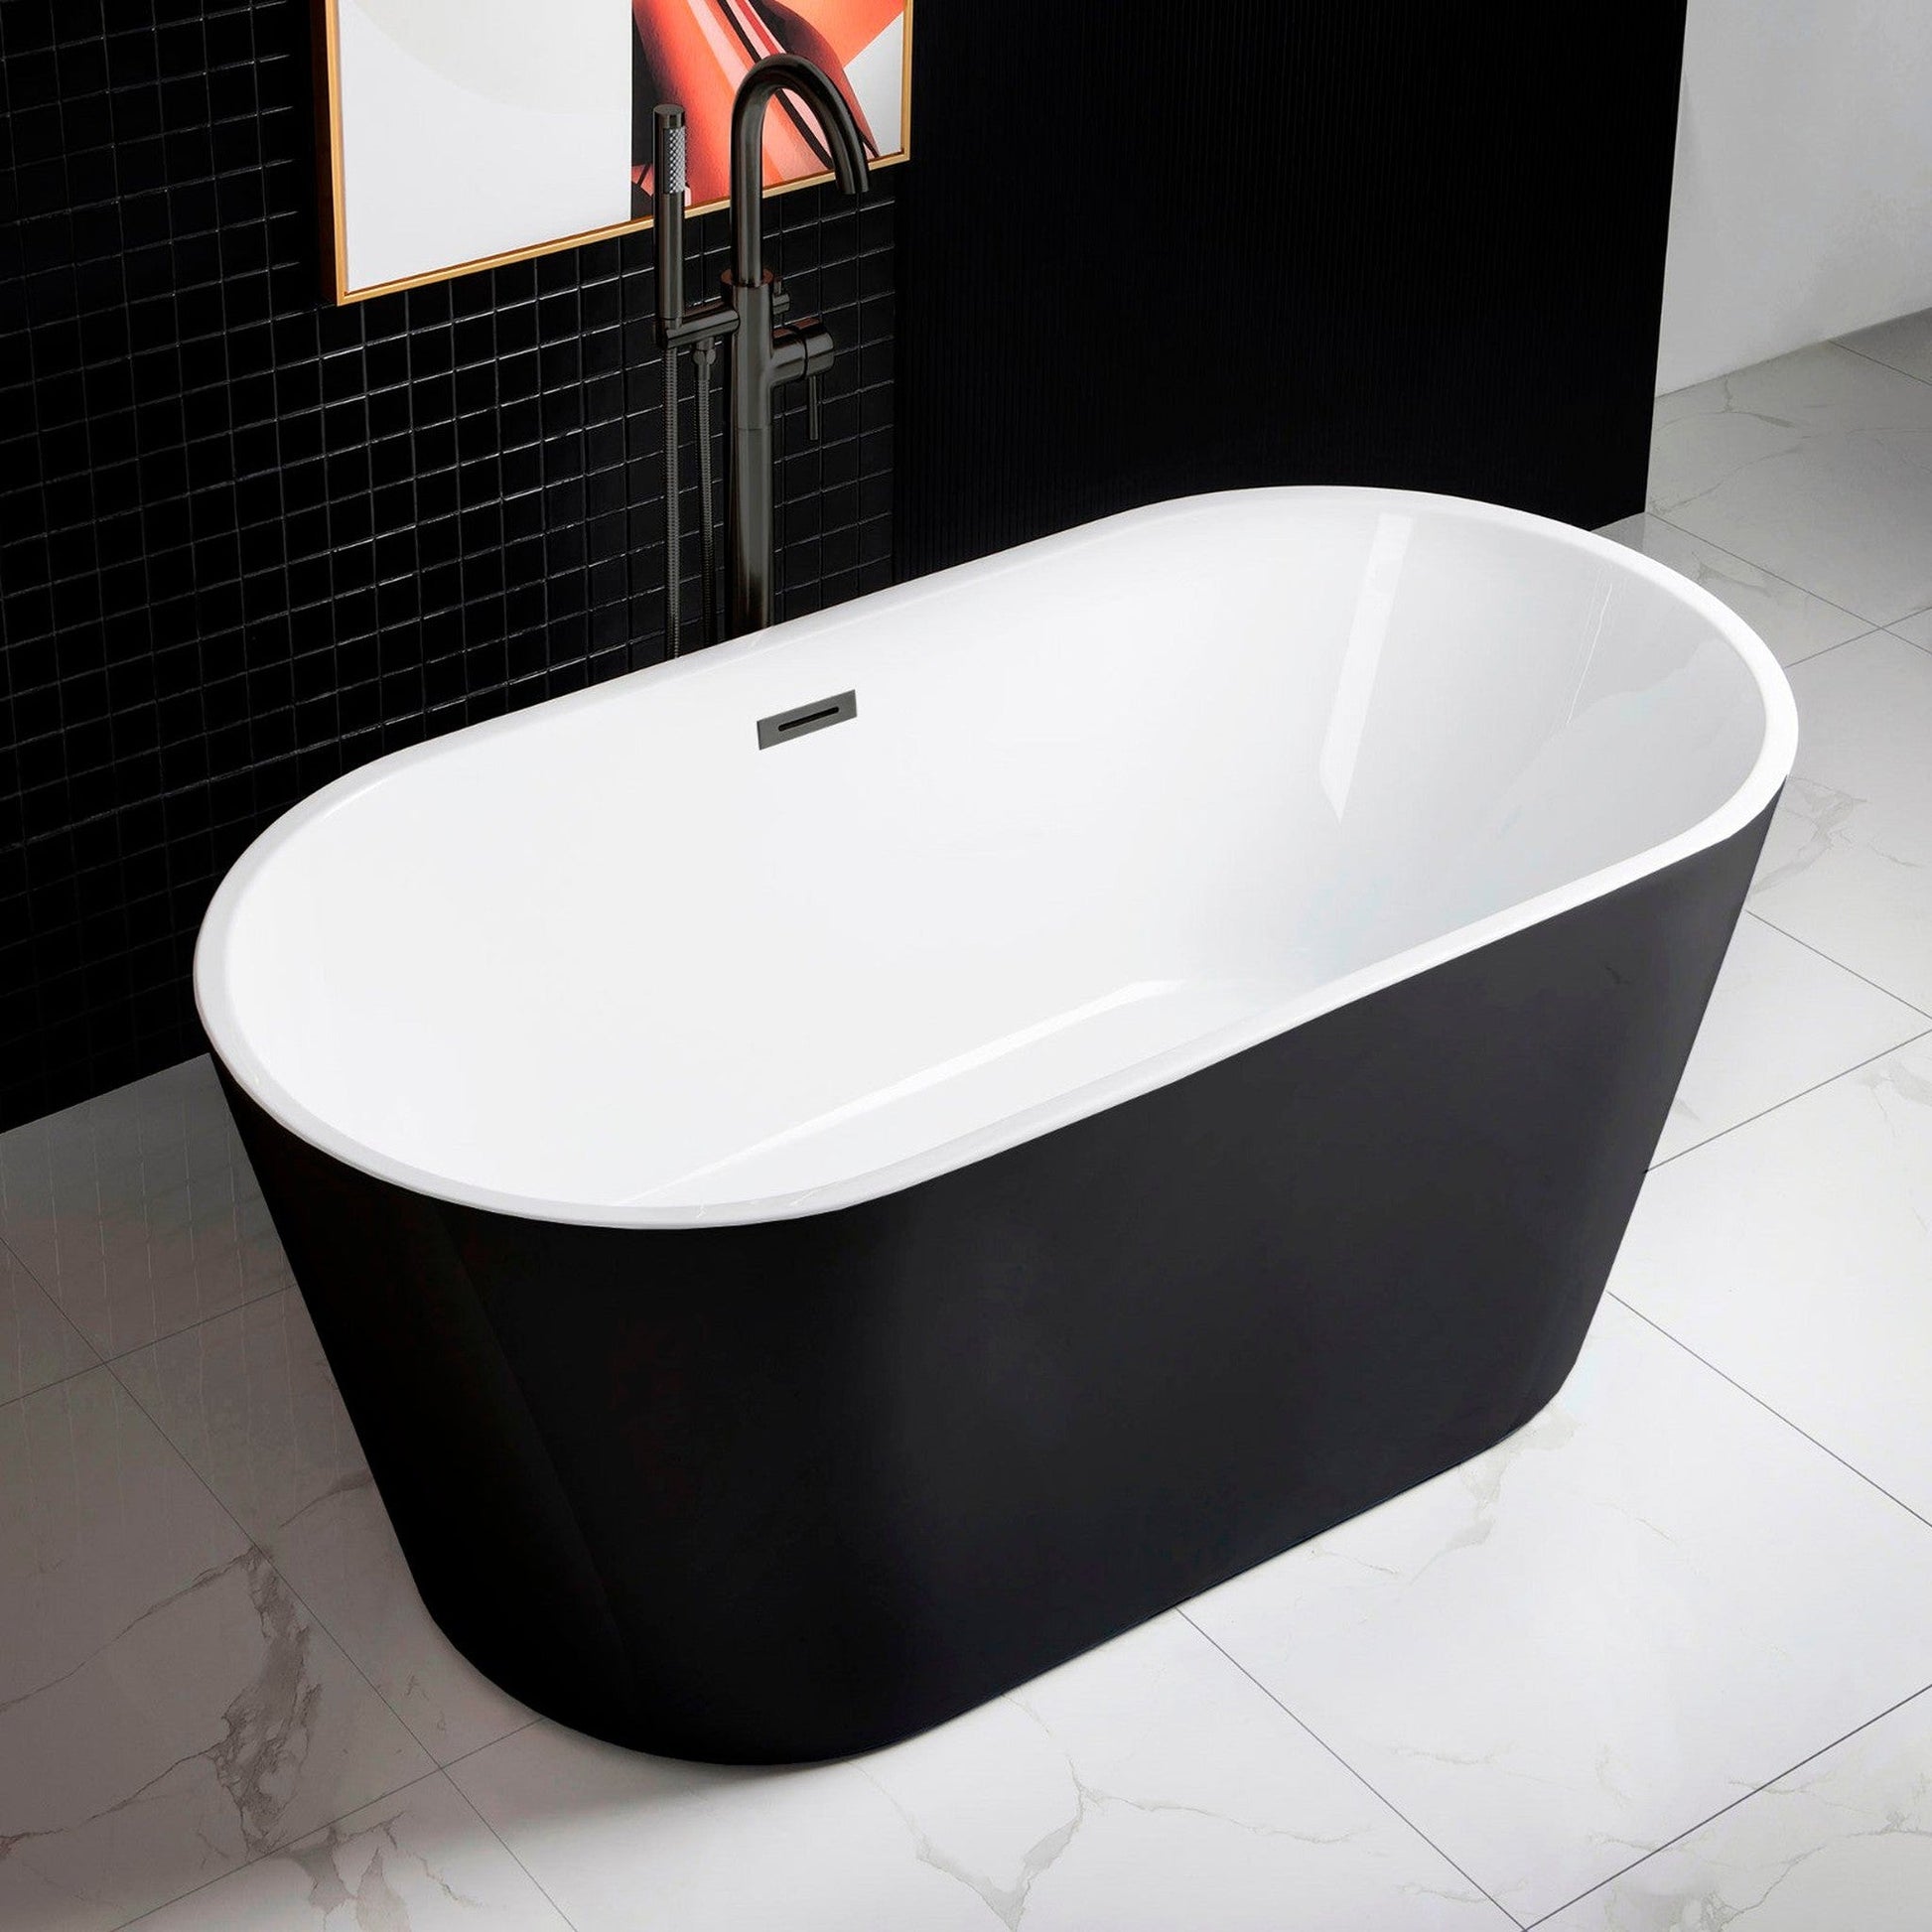 WoodBridge 59" Black Acrylic Freestanding Contemporary Soaking Bathtub With Matte Black Drain, Overflow, F0037MB Tub Filler and Caddy Tray